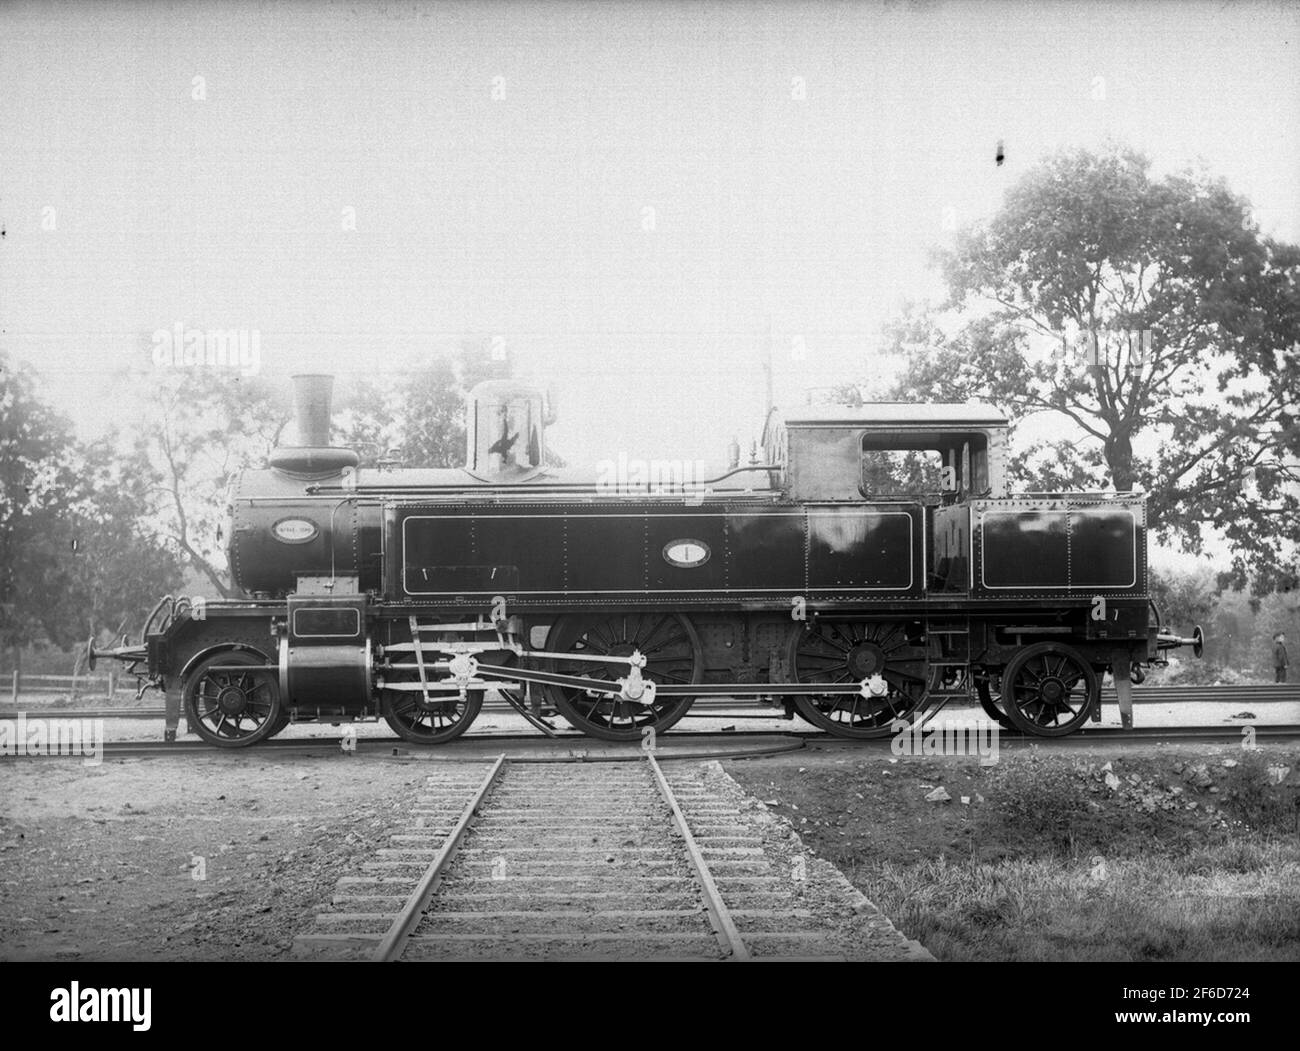 SNJ Lok 1. Delivery photo. Steam locomotive on turntable. A compunelok. The locomotive was manufactured by Nohab. Were slowned in 1936. Stock Photo